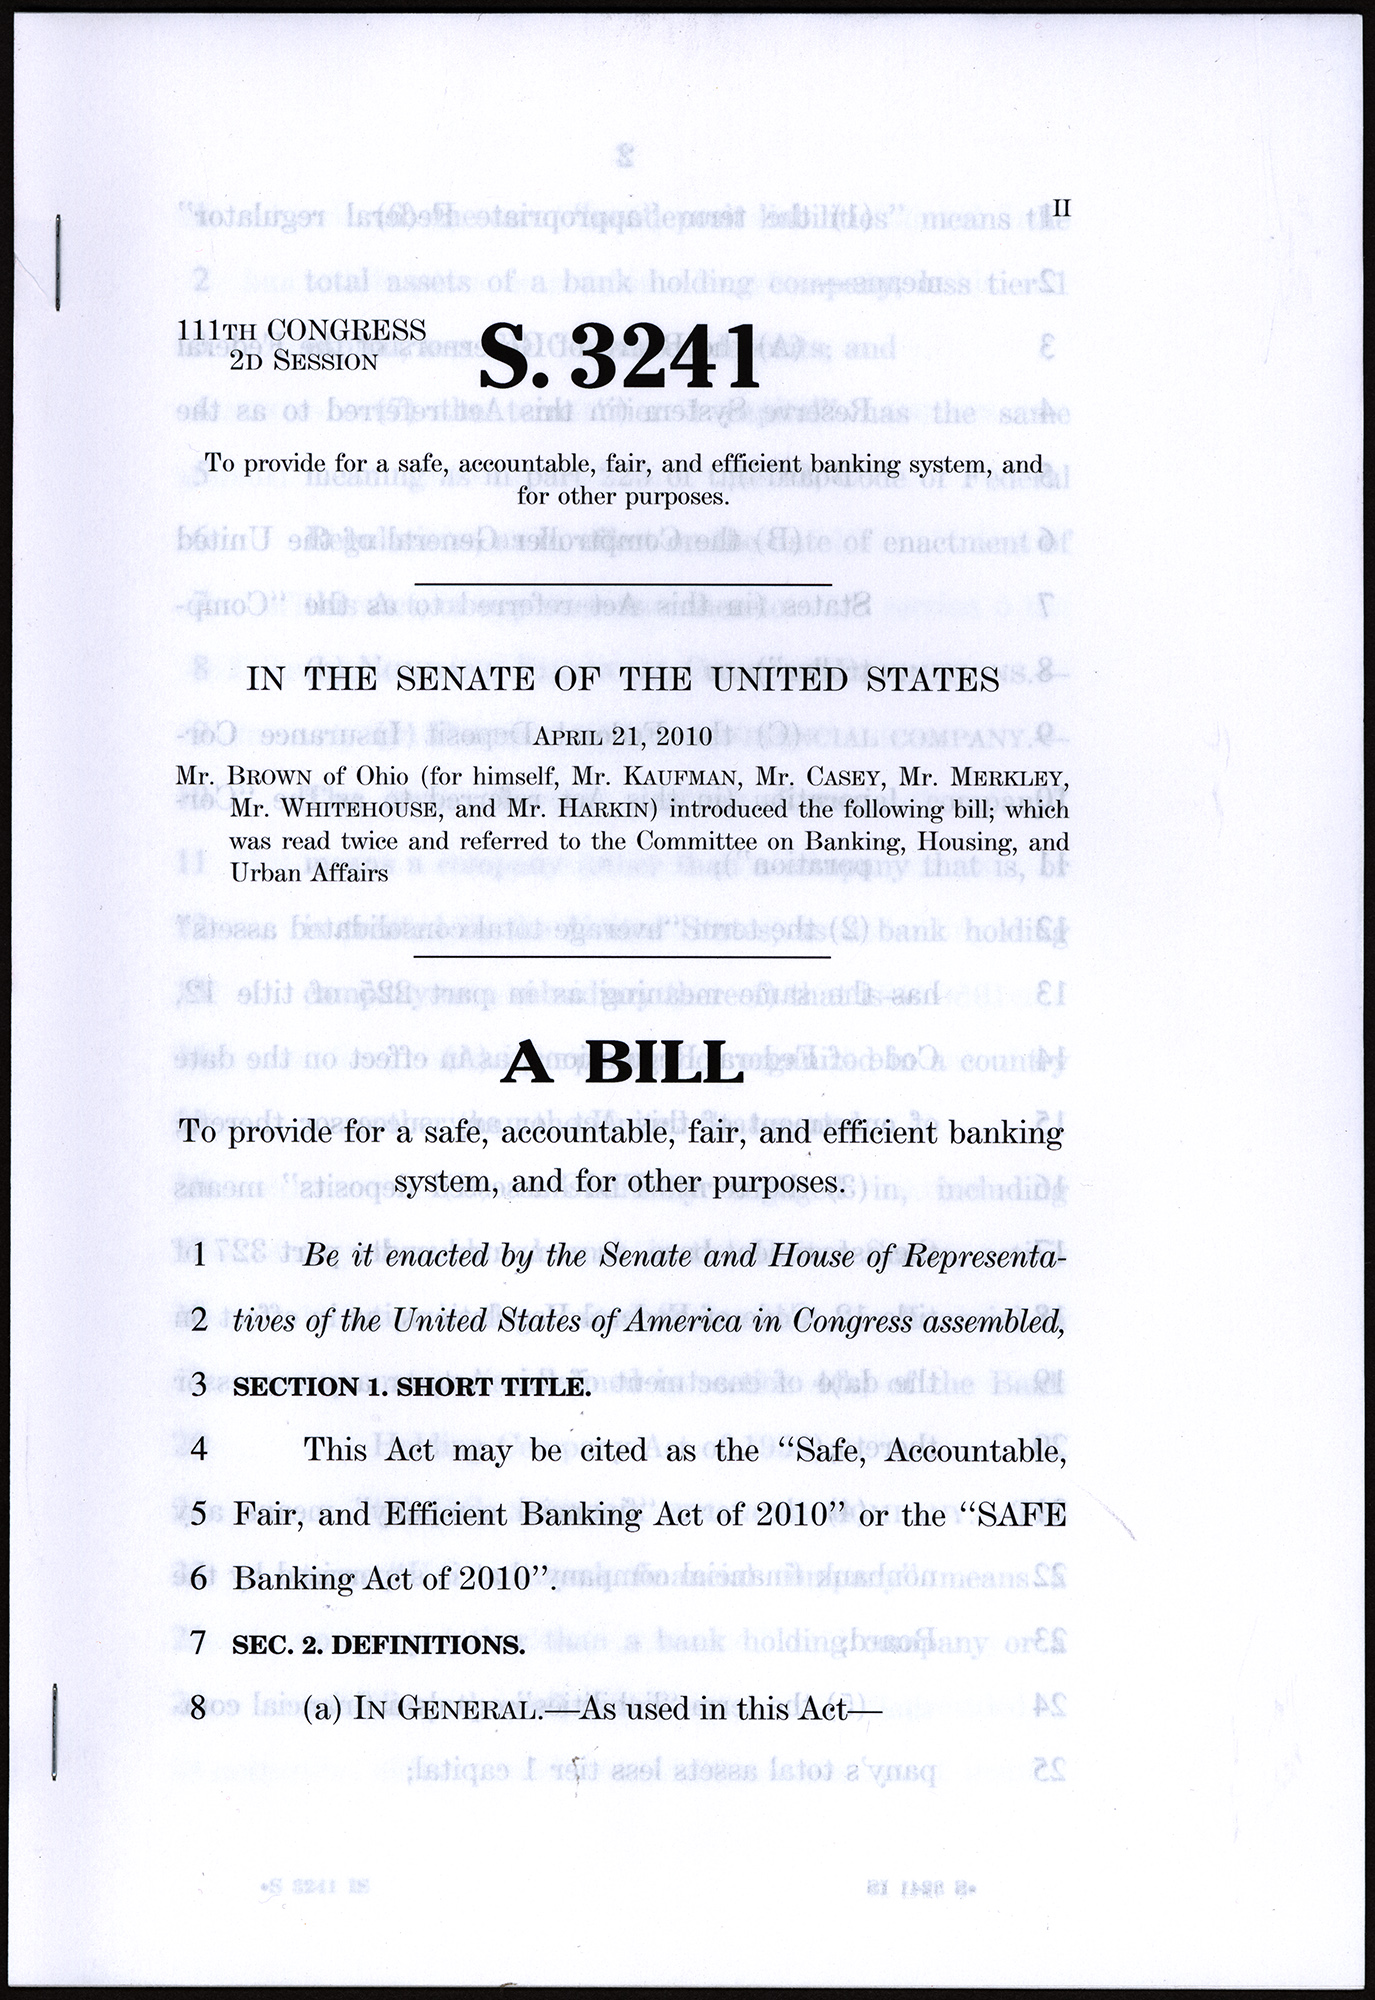 Safe Banking Act of 2010, S. 3241, 111th Congress, 2010 April 21